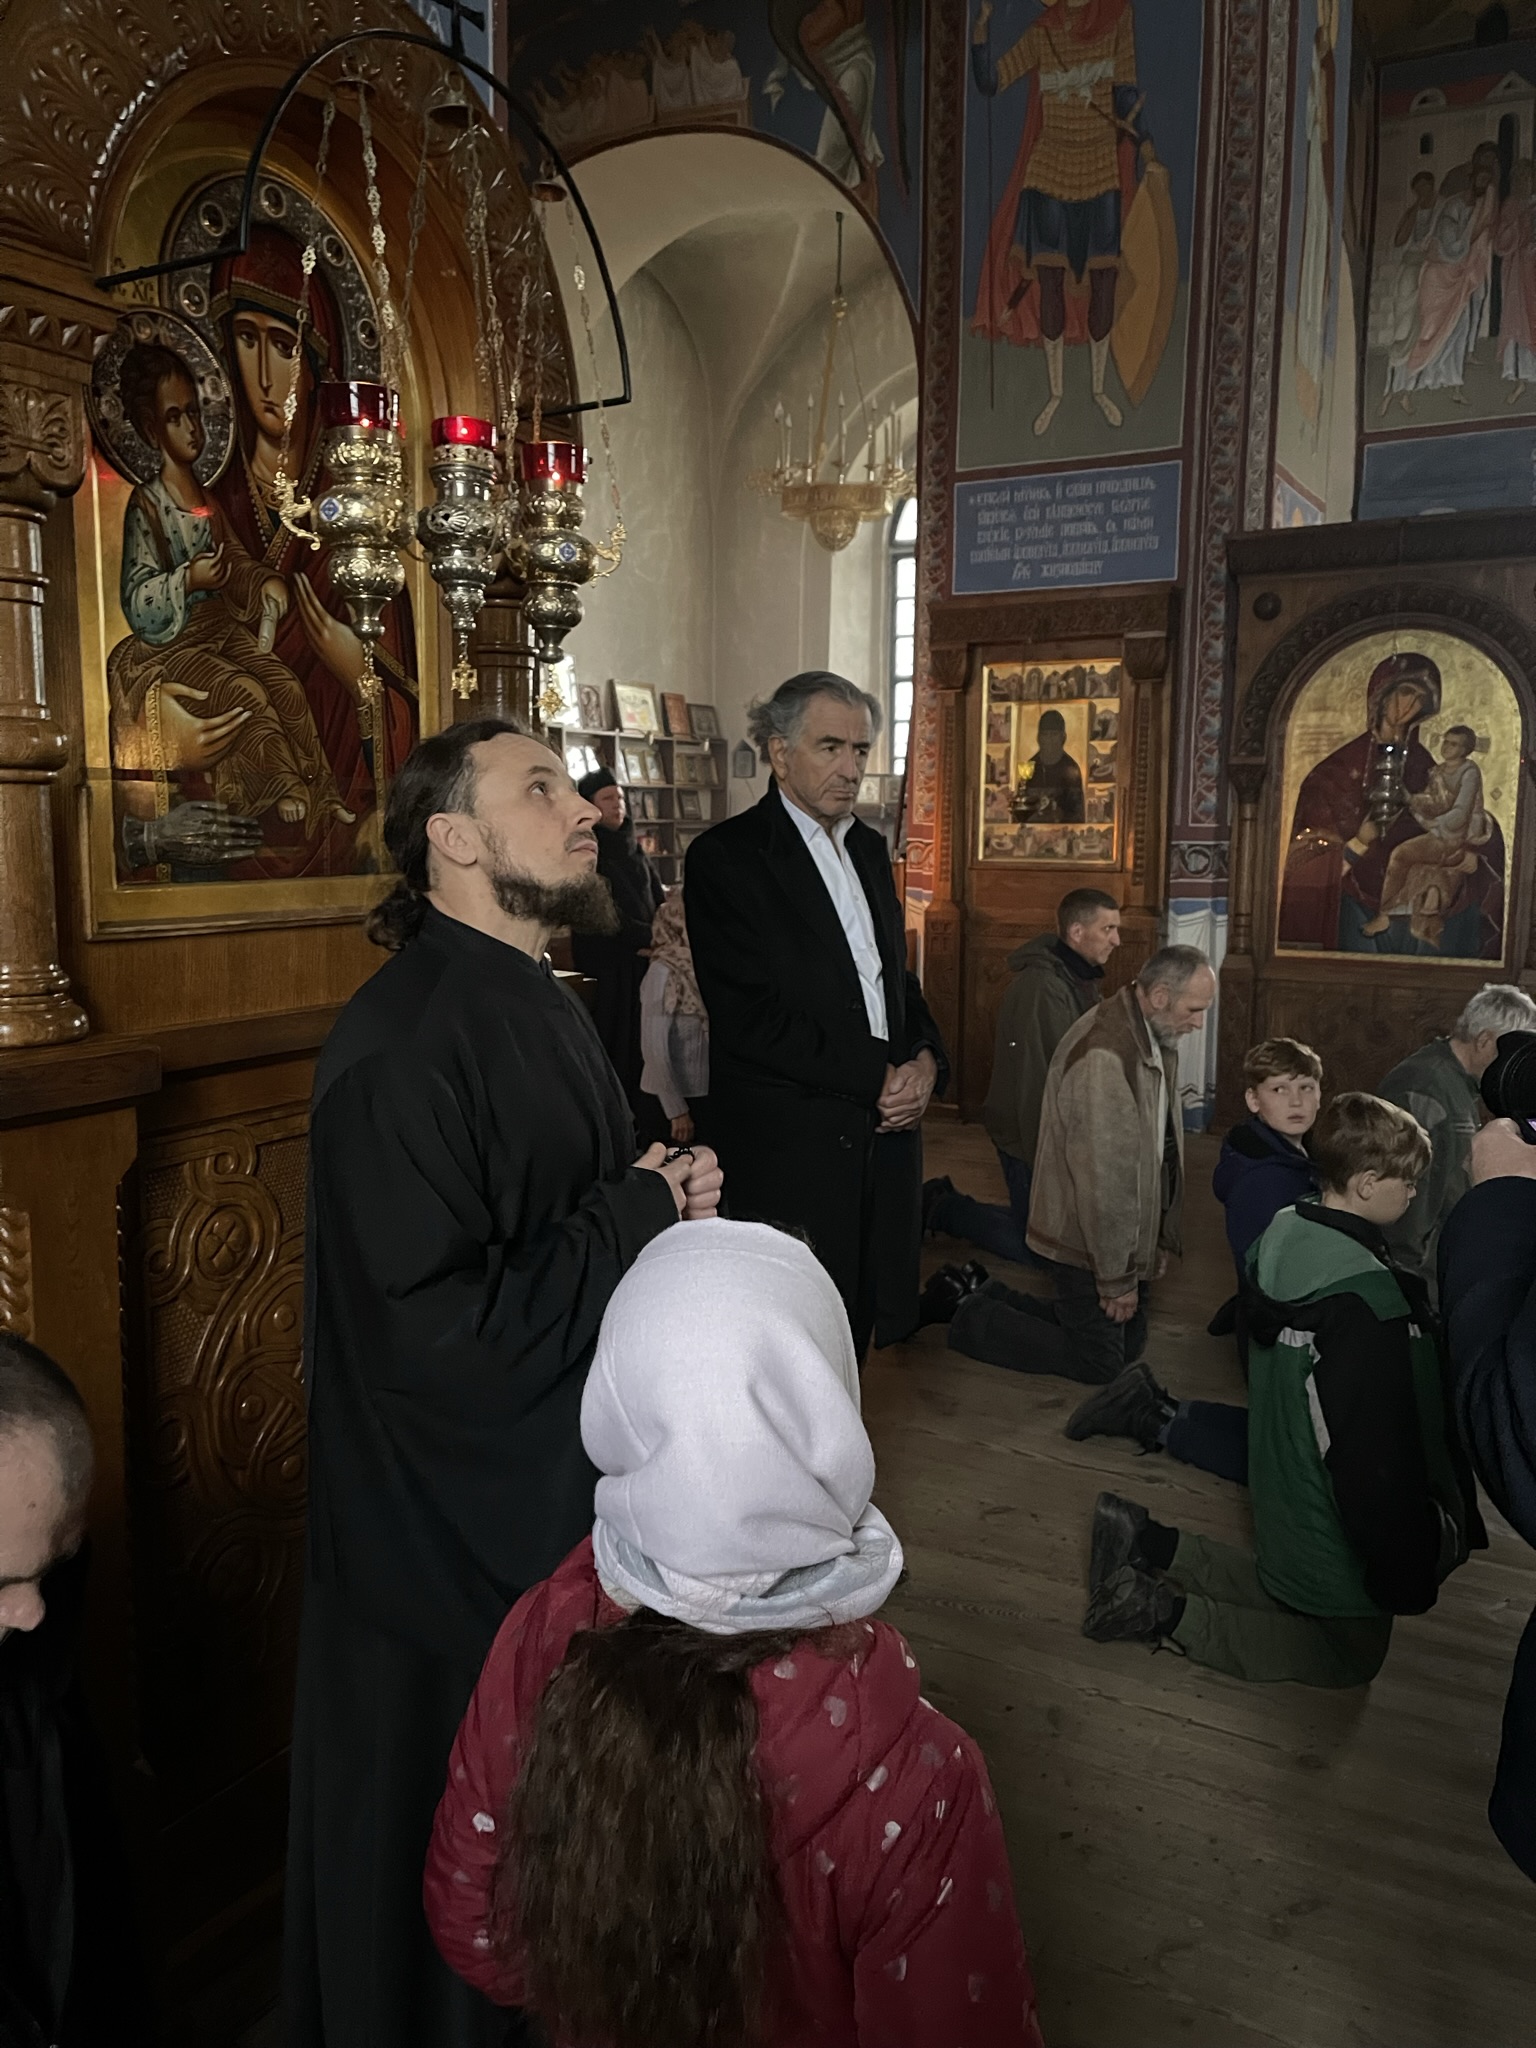 In this monastery, near Kyiv, the monks pray for Putin's defeat.